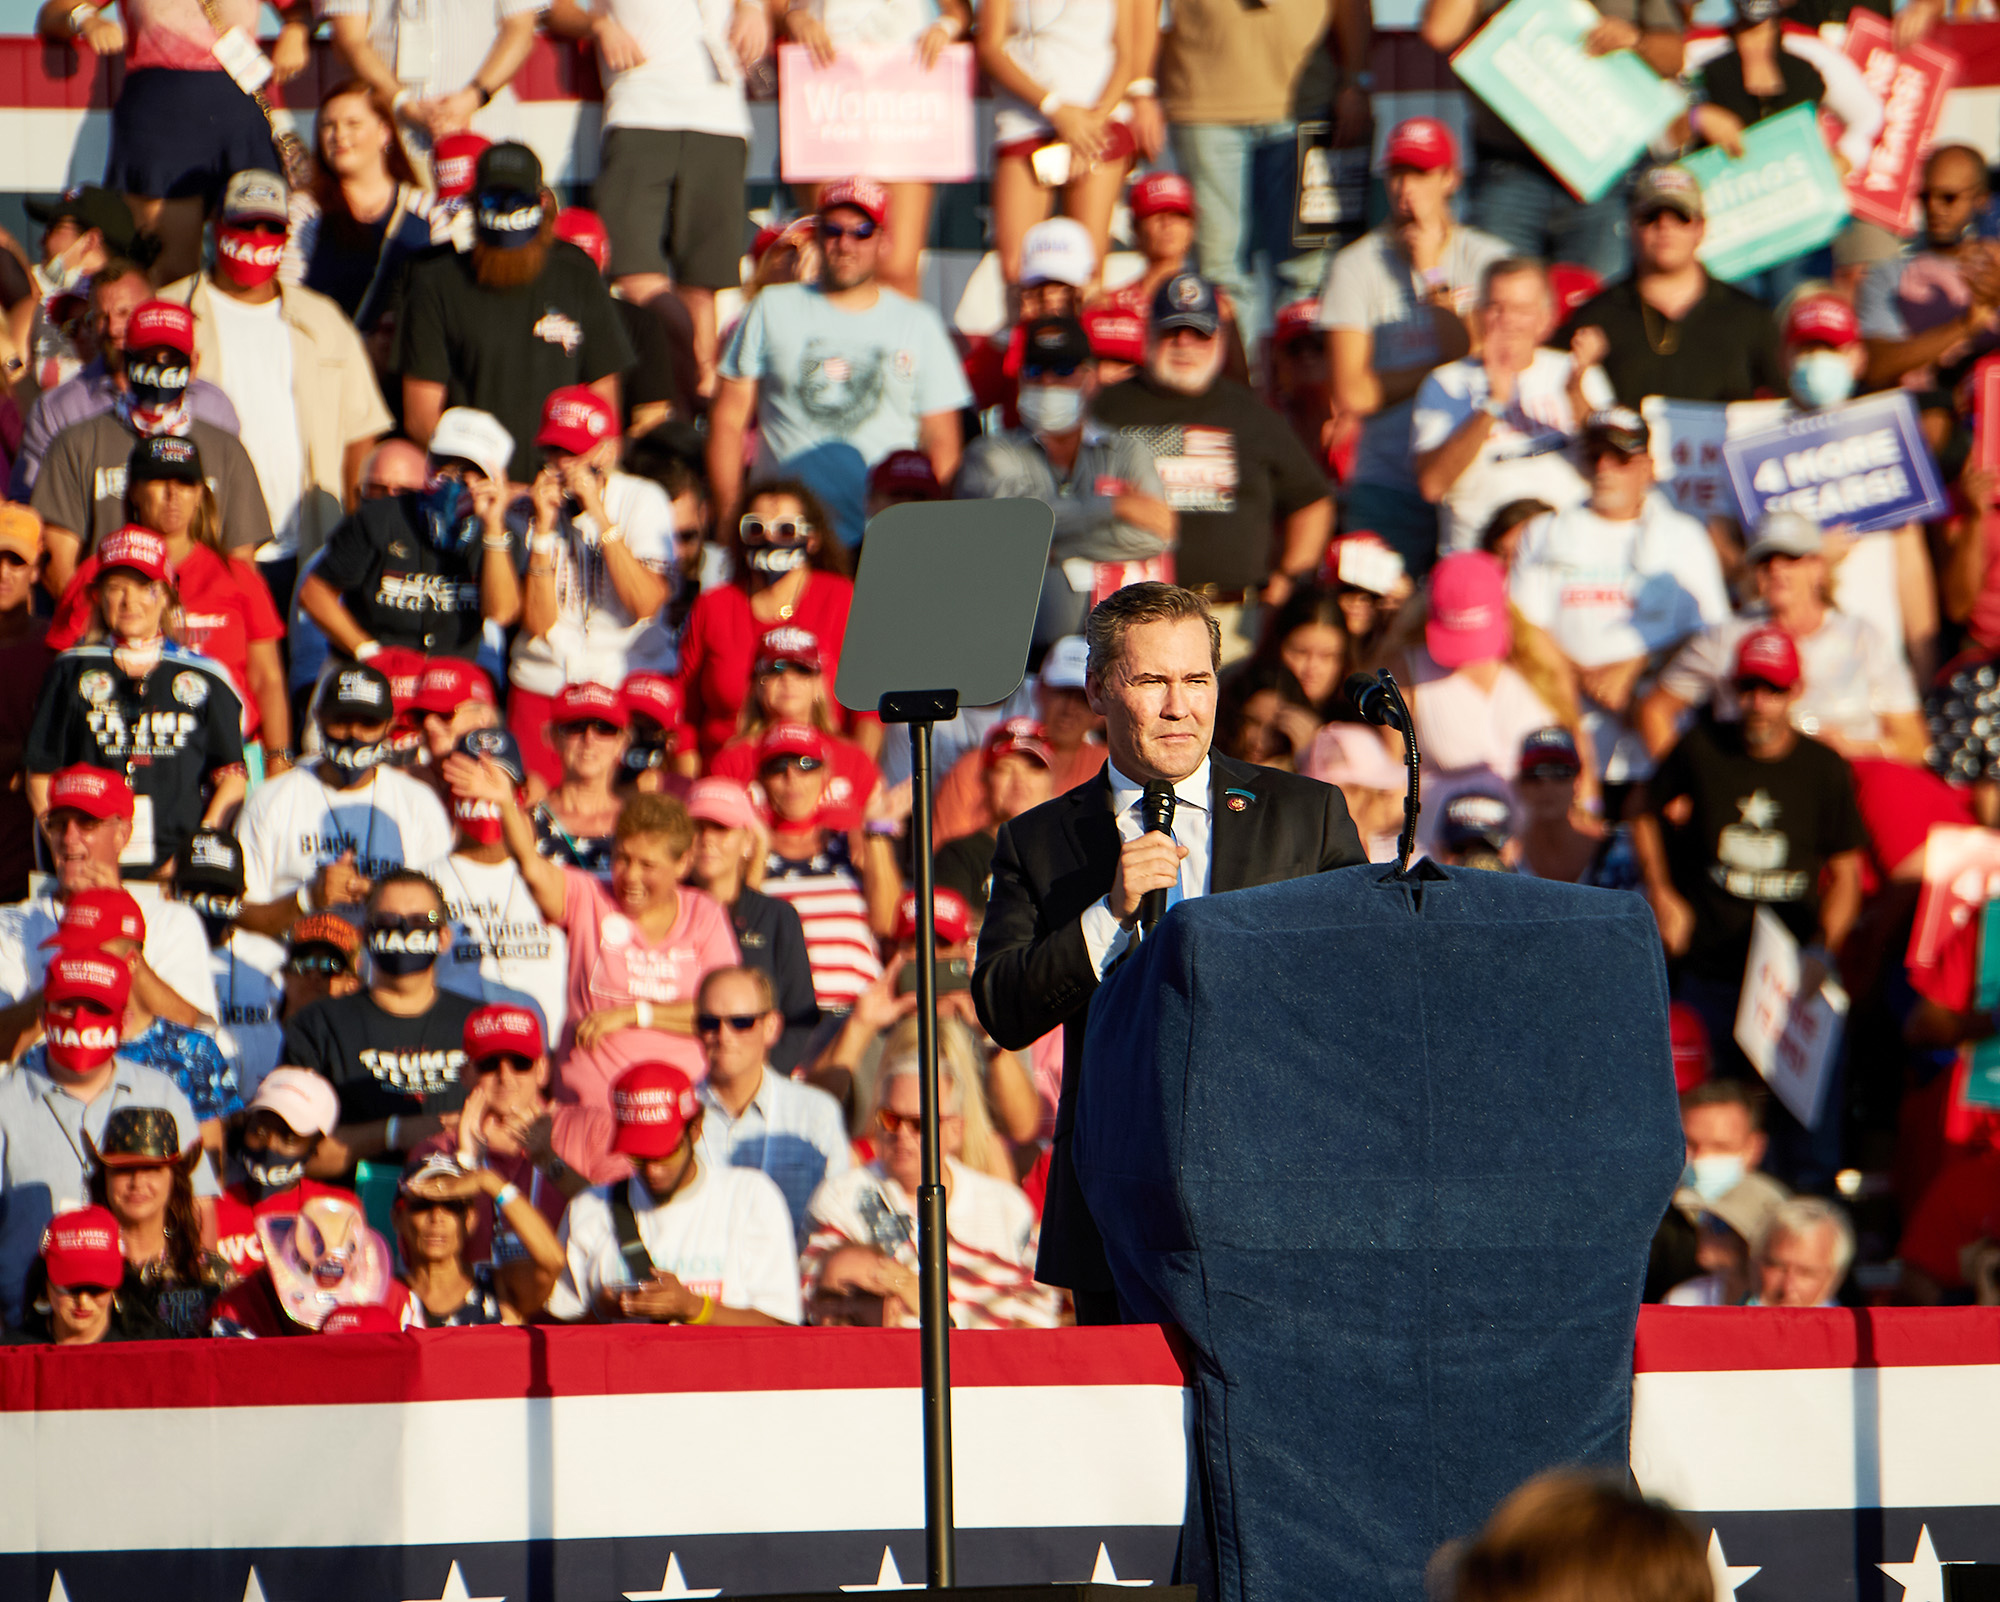 PHOTO: Rep. Michael Waltz speaks to the crowd before the arrival of President Donald Trump during a campaign rally in Sanford, Fla., Oct. 12, 2020.